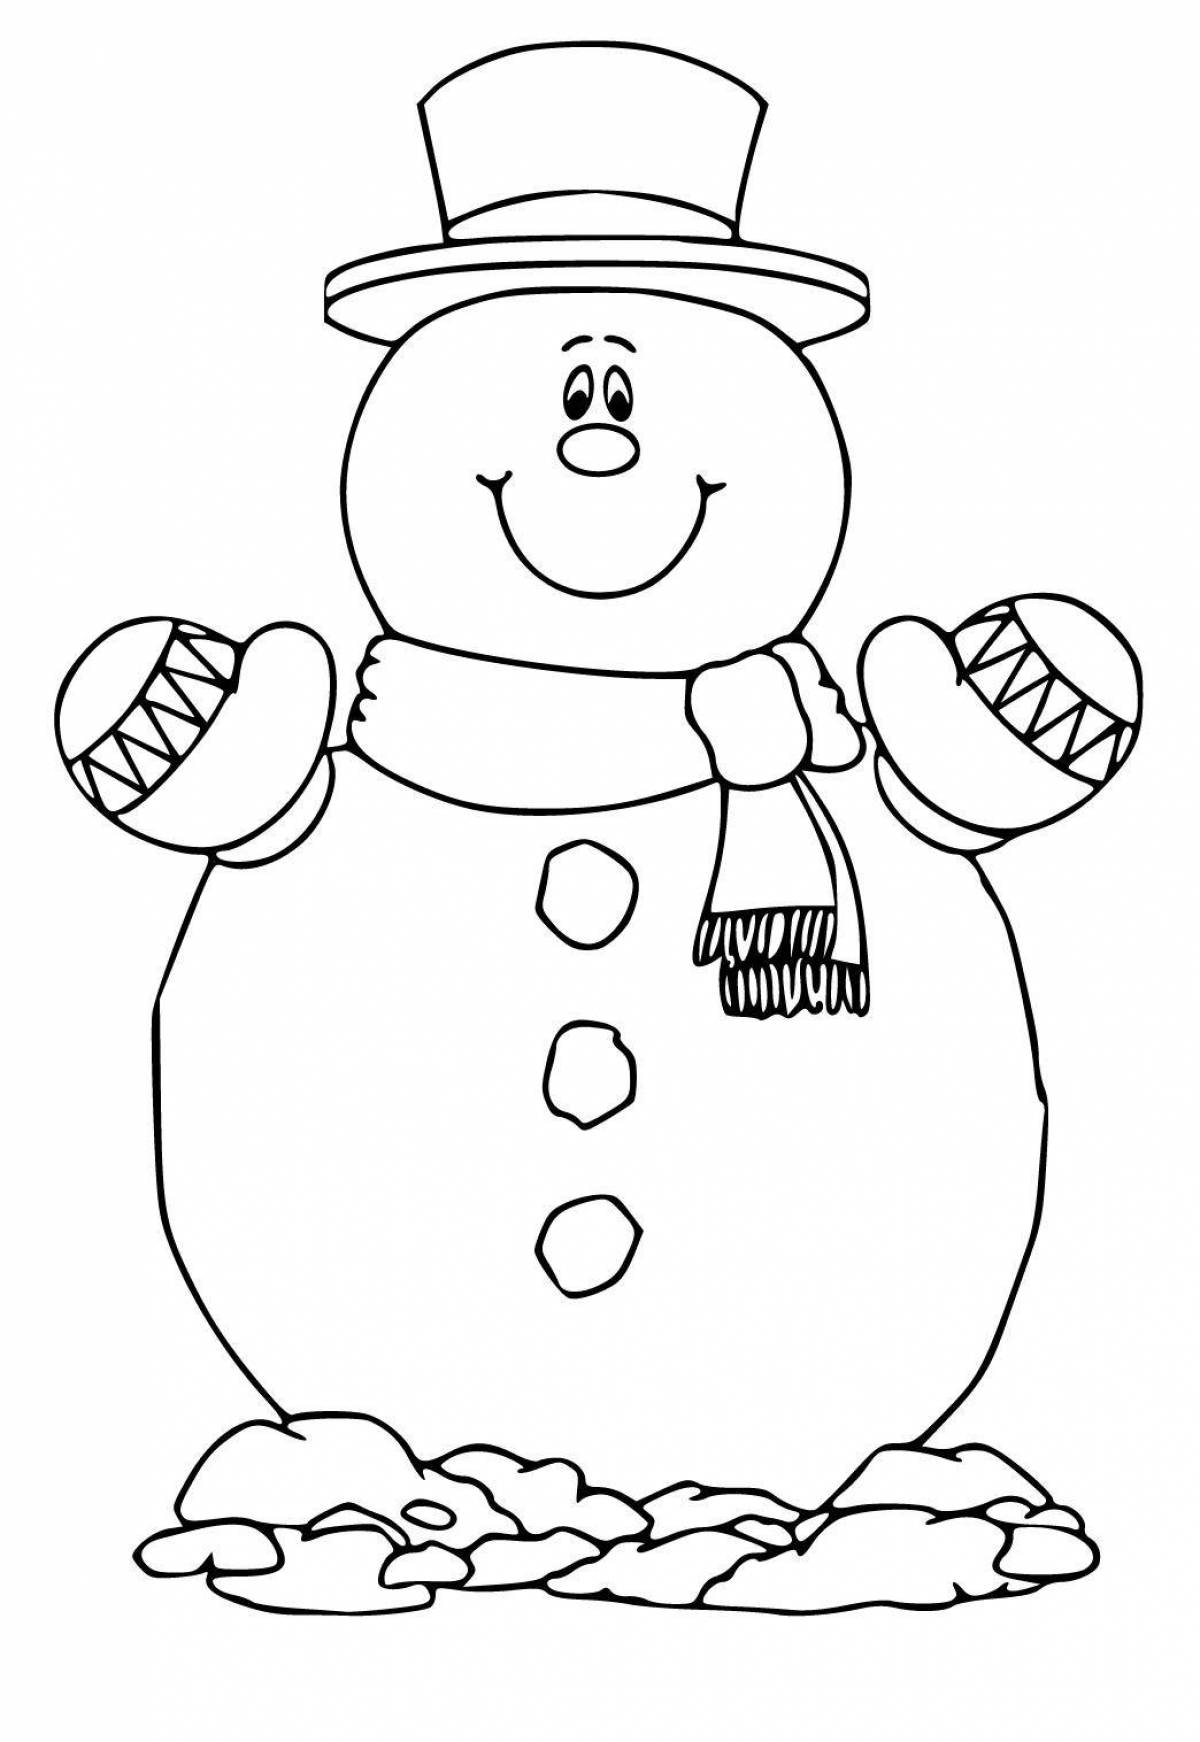 Snowman without nose #3